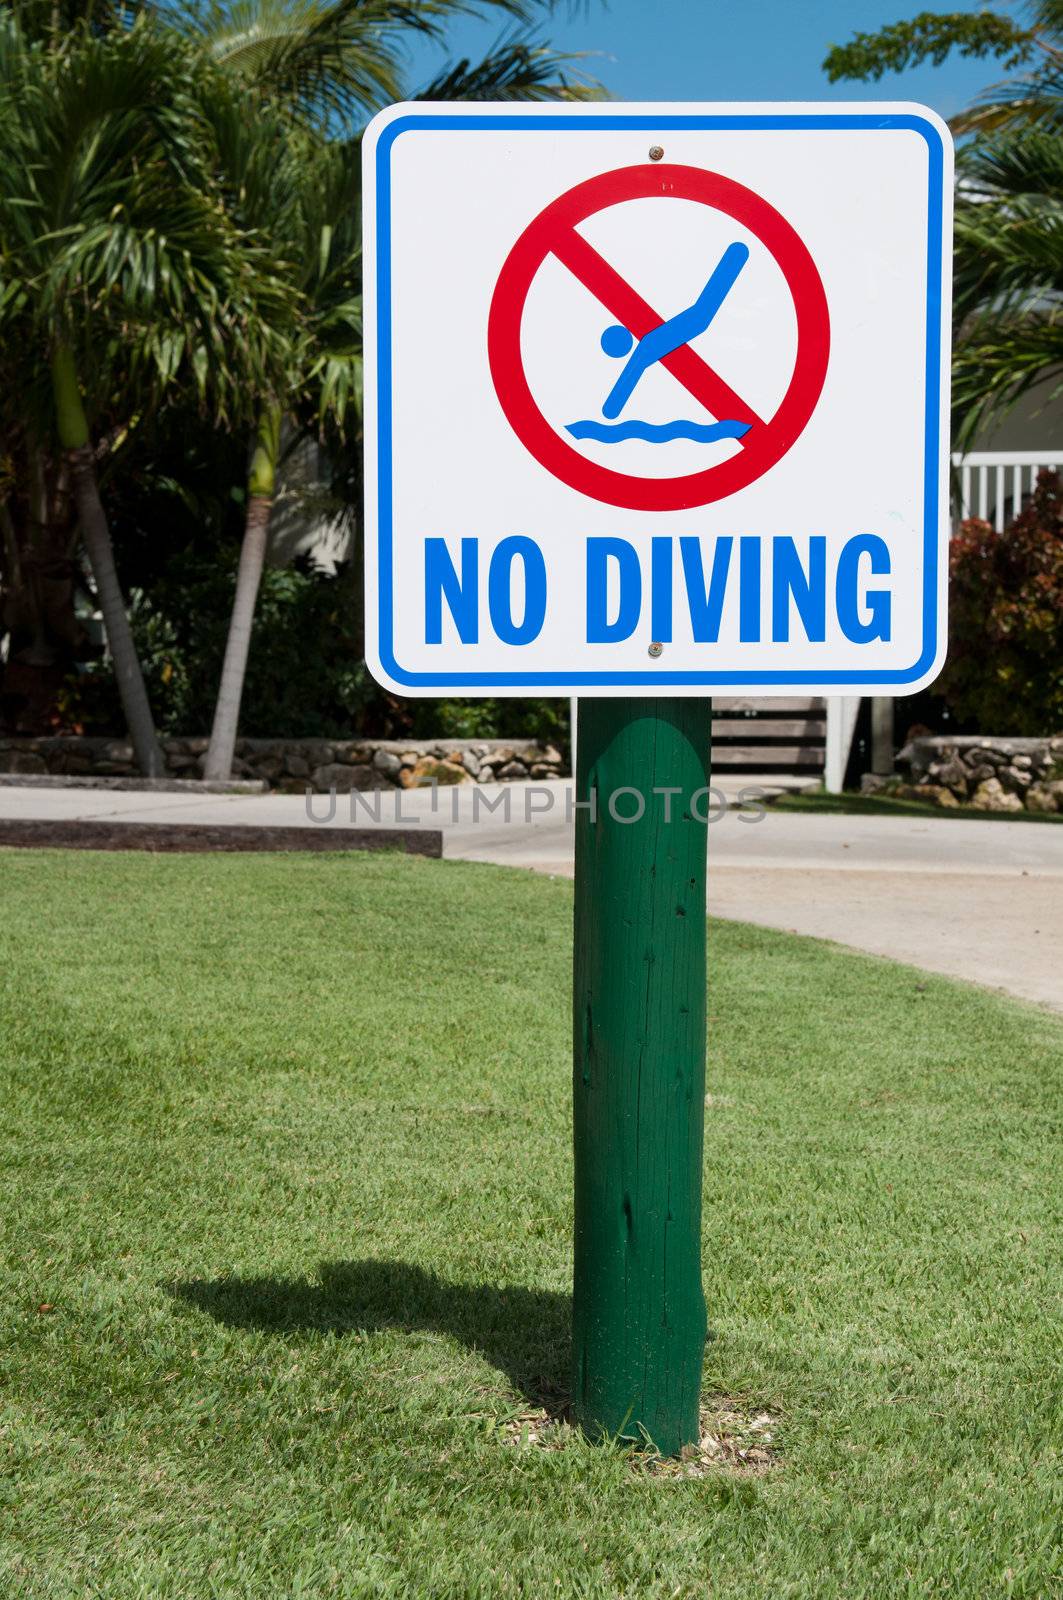 no diving sign on the grass (tropical resort setting with palm trees)